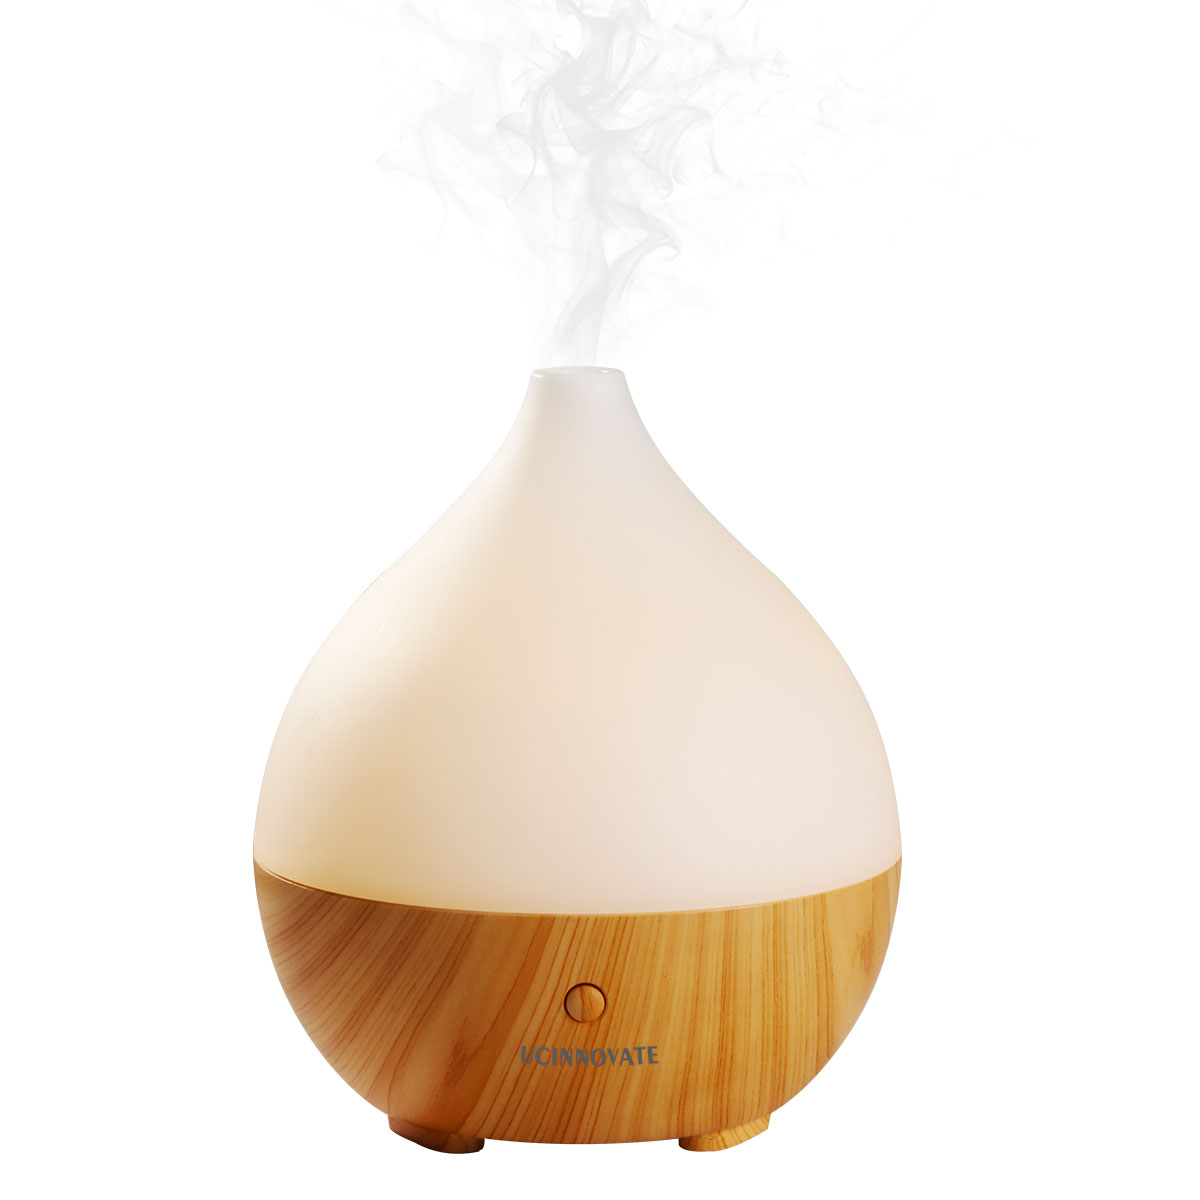 Essential Oil Cool Mist Diffuser, 100ml Mini Aromatherapy Home Diffuser 3 Mode with LED Light Up to 5 Hours Run time Quiet Humidifier USB 5V Powered / Auto-Off Function